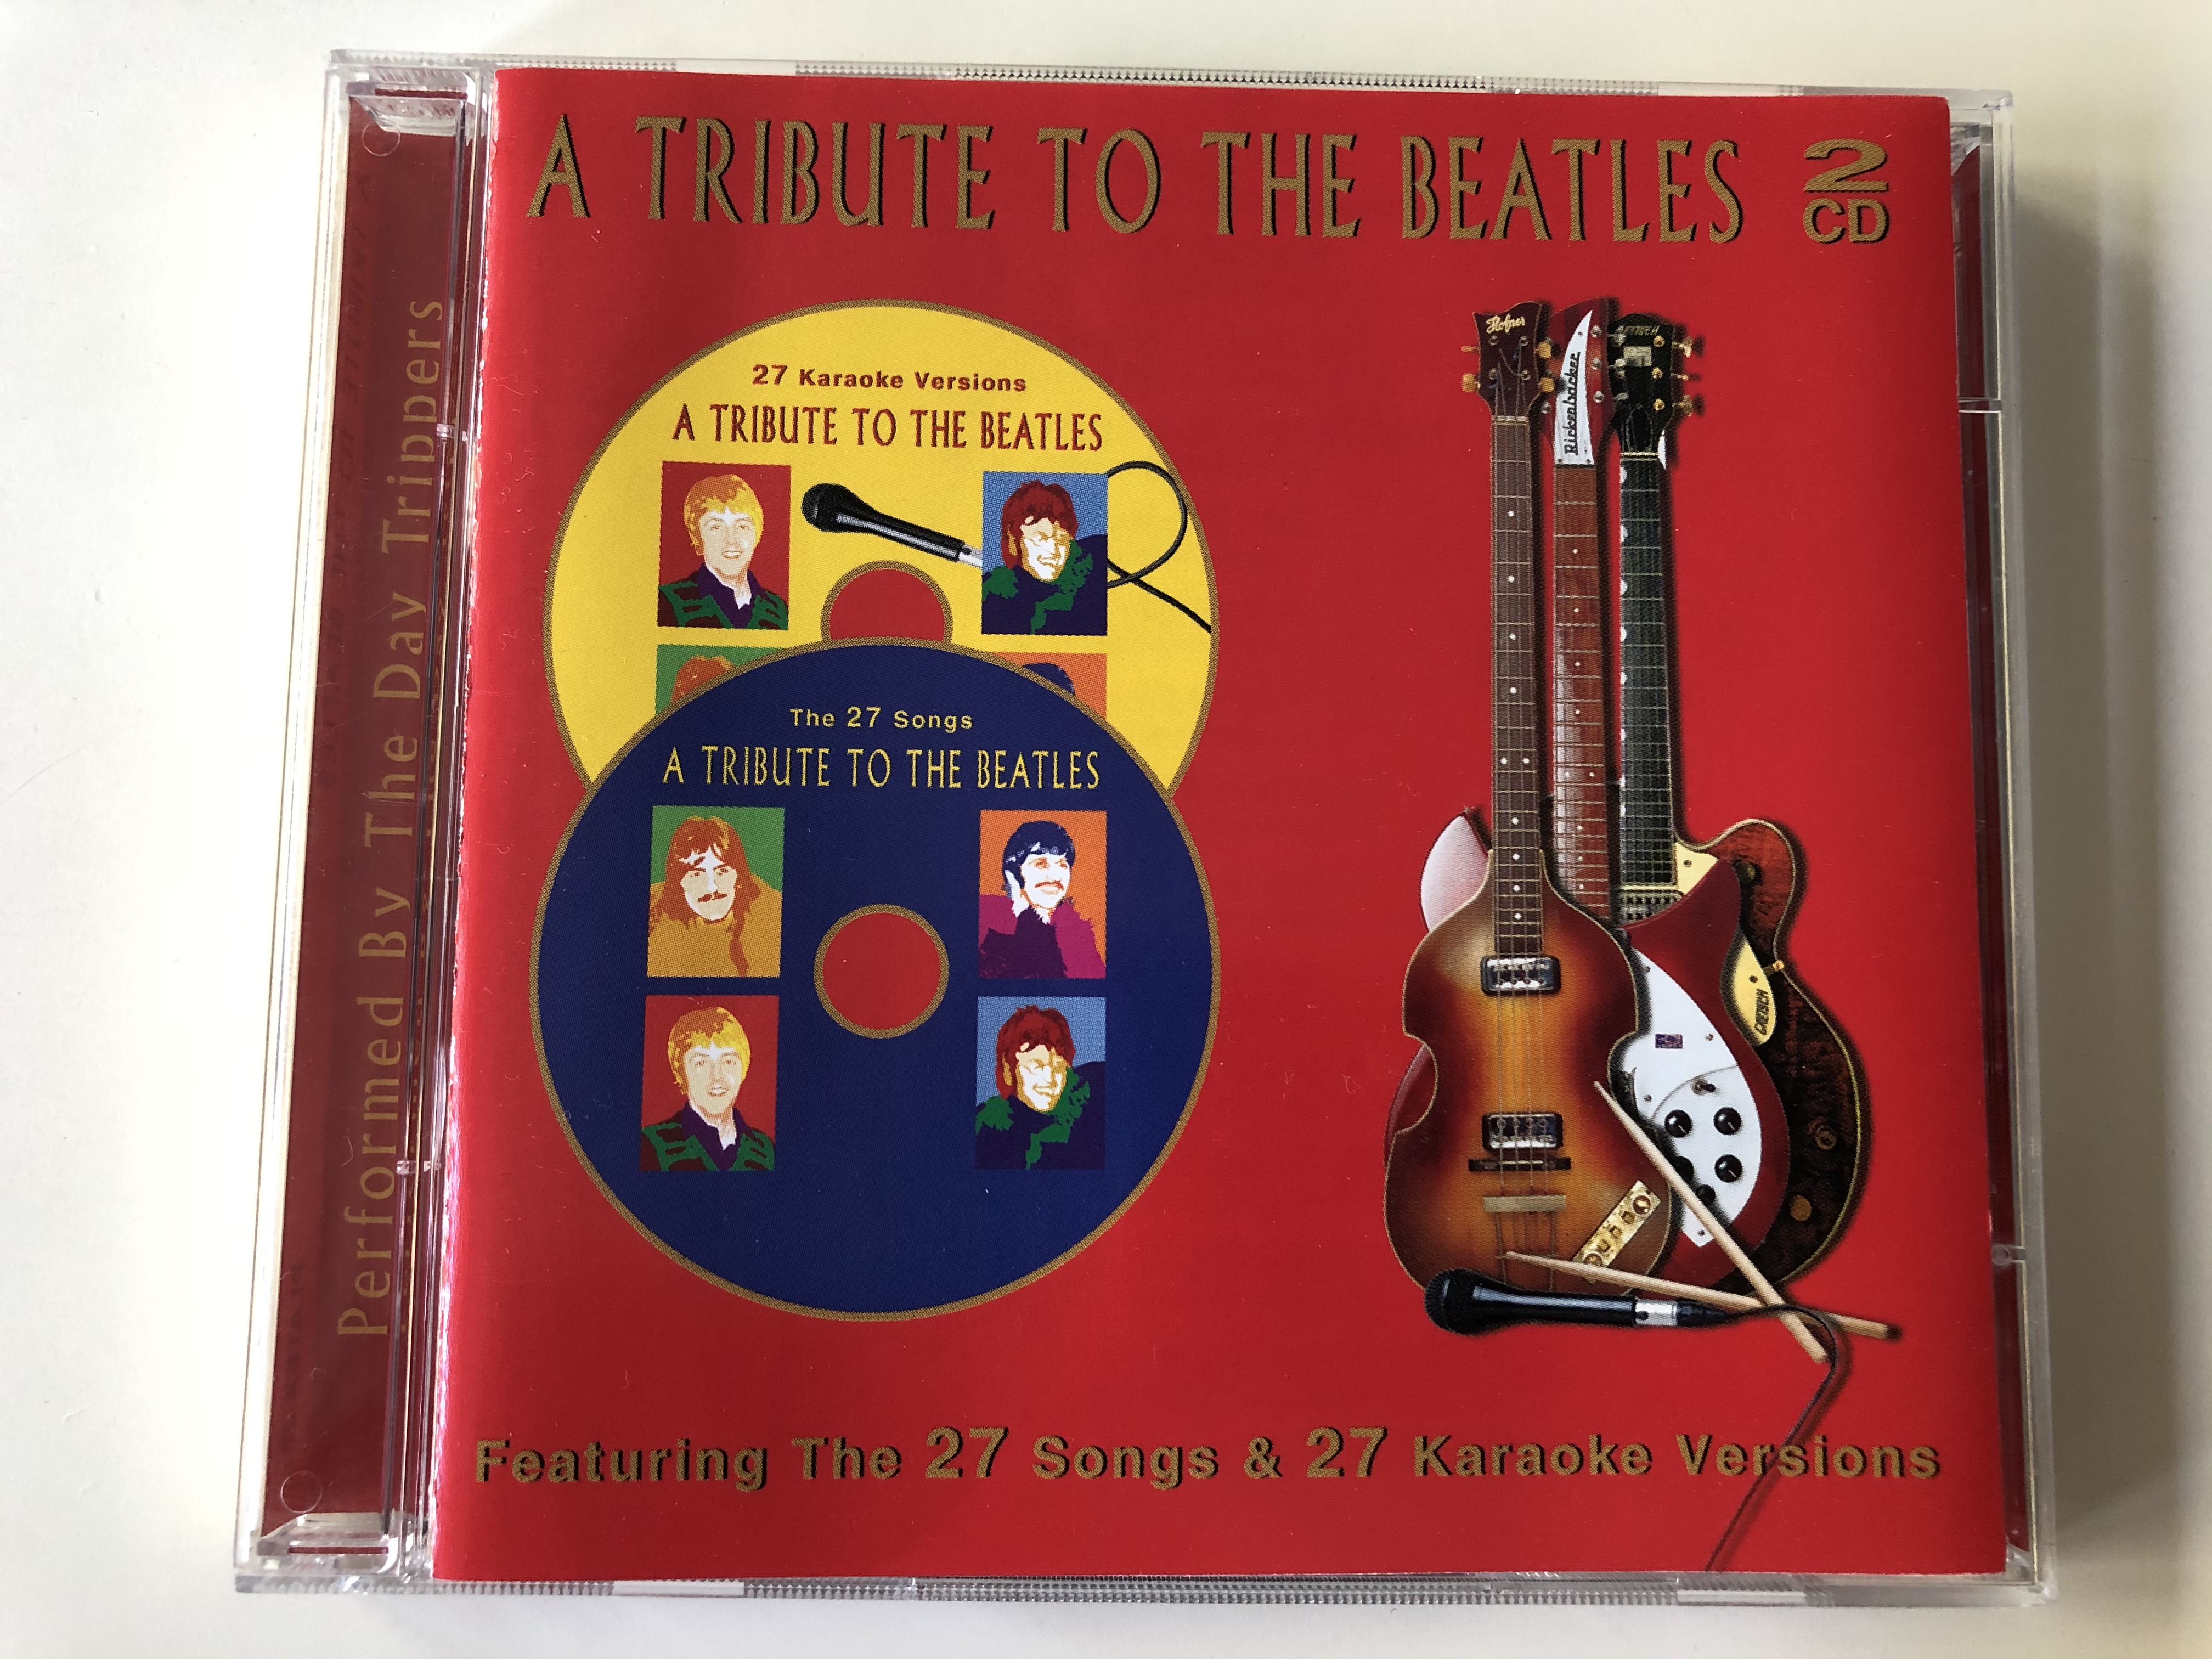 a-tribute-to-the-beatles-featuring-the-27-songs-27-karaoke-versions-performed-by-the-day-trippers-prism-leisure-2x-audio-cd-2001-platbx-2213-1-.jpg